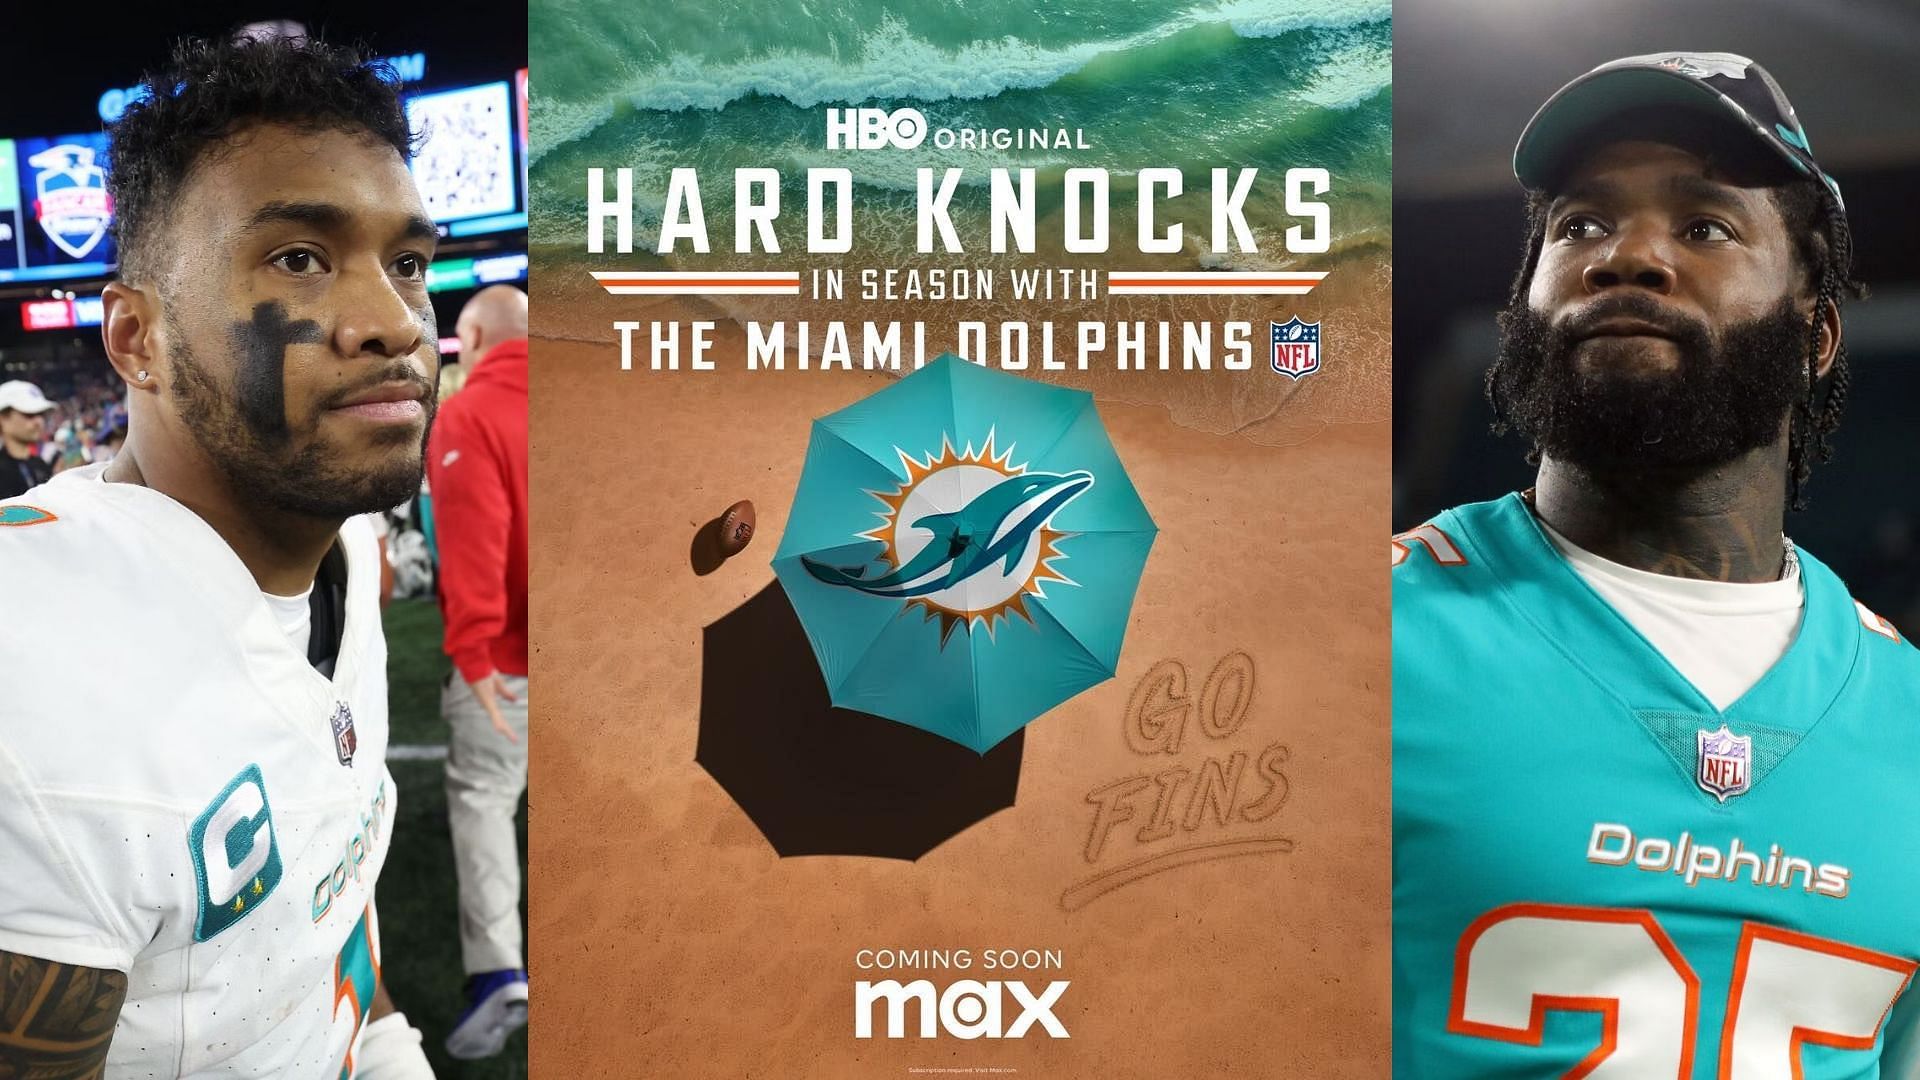 Xavien Howard and Tua Tagovailoa will appear on Hard Knocks, but neither is happy about it (outer images via Getty, inner image via HBO/Facebook)